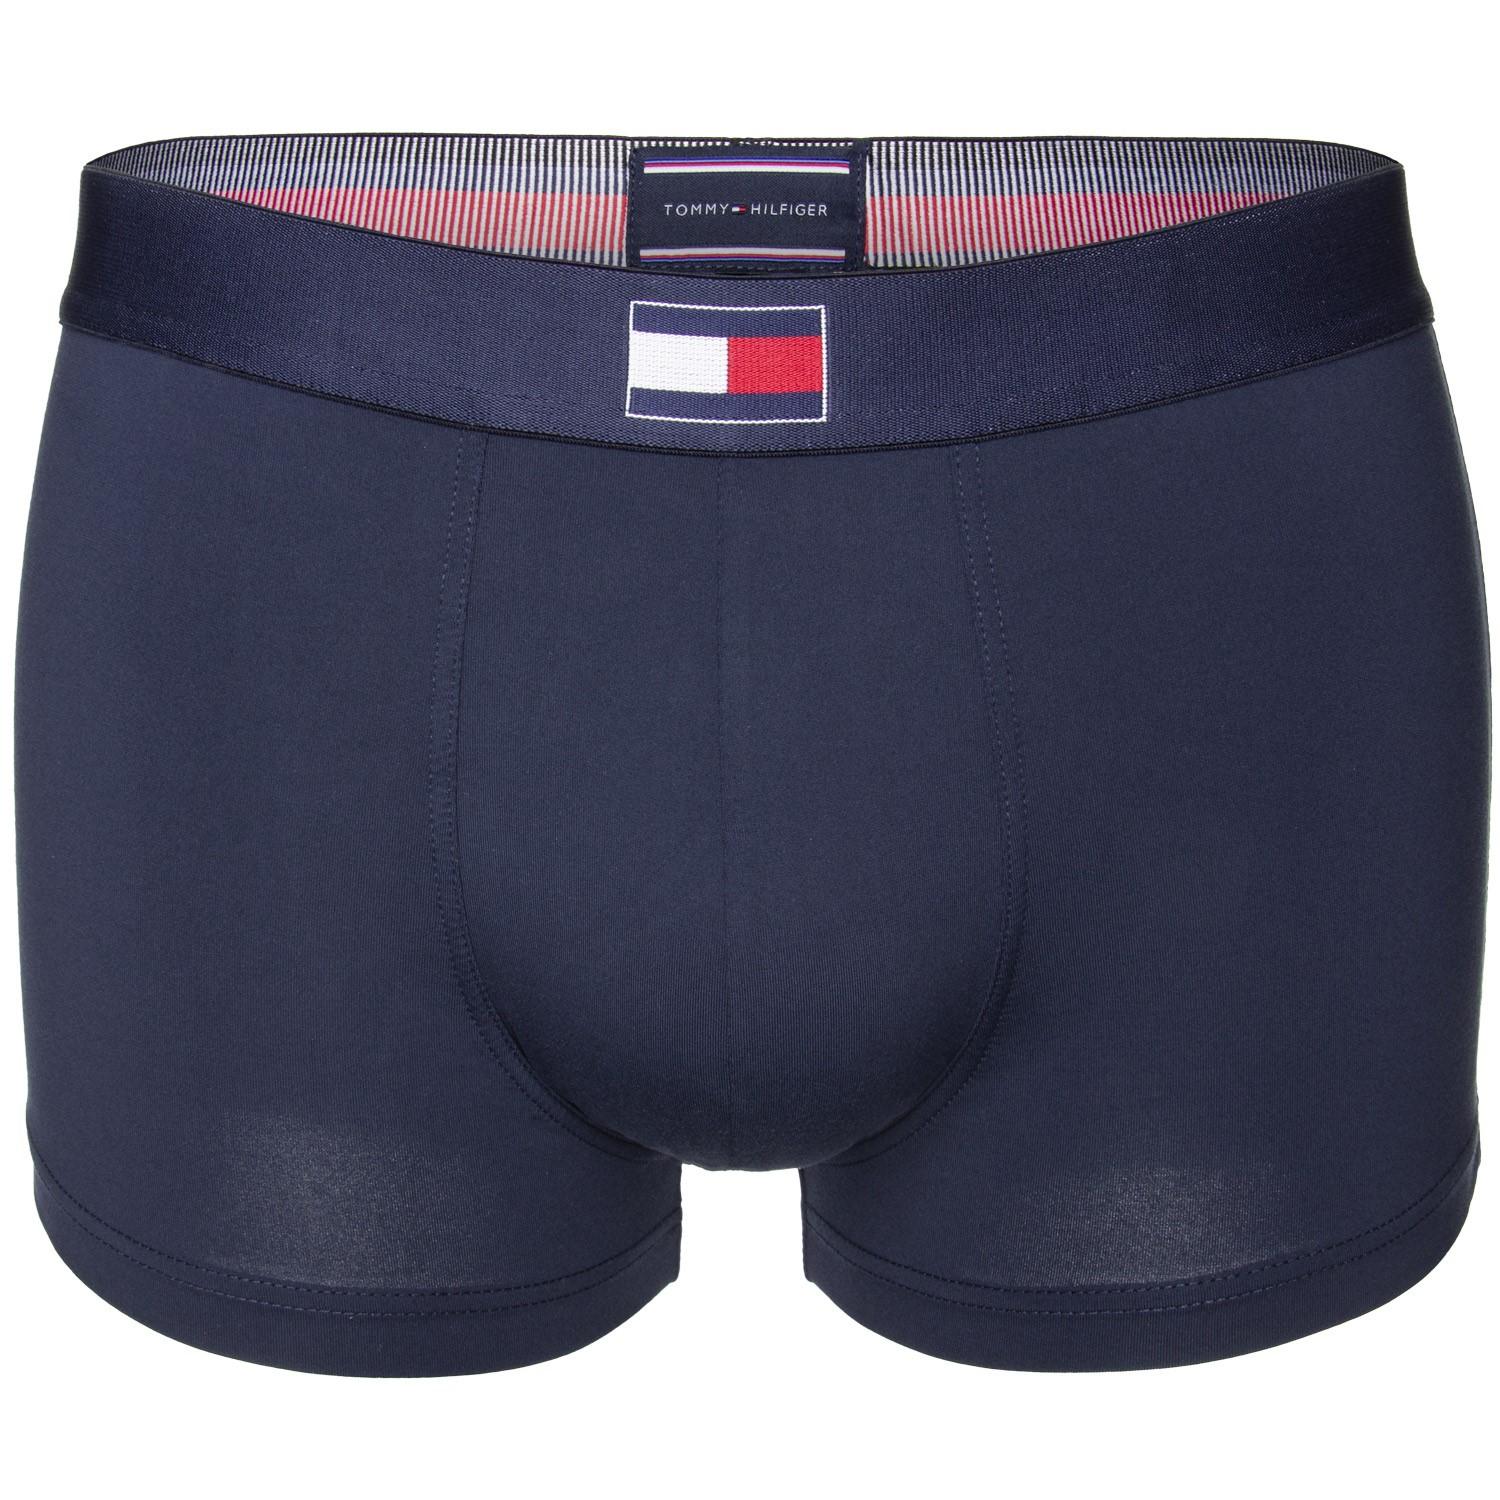 Tommy Hilfiger Flag Core Micro LR Trunk